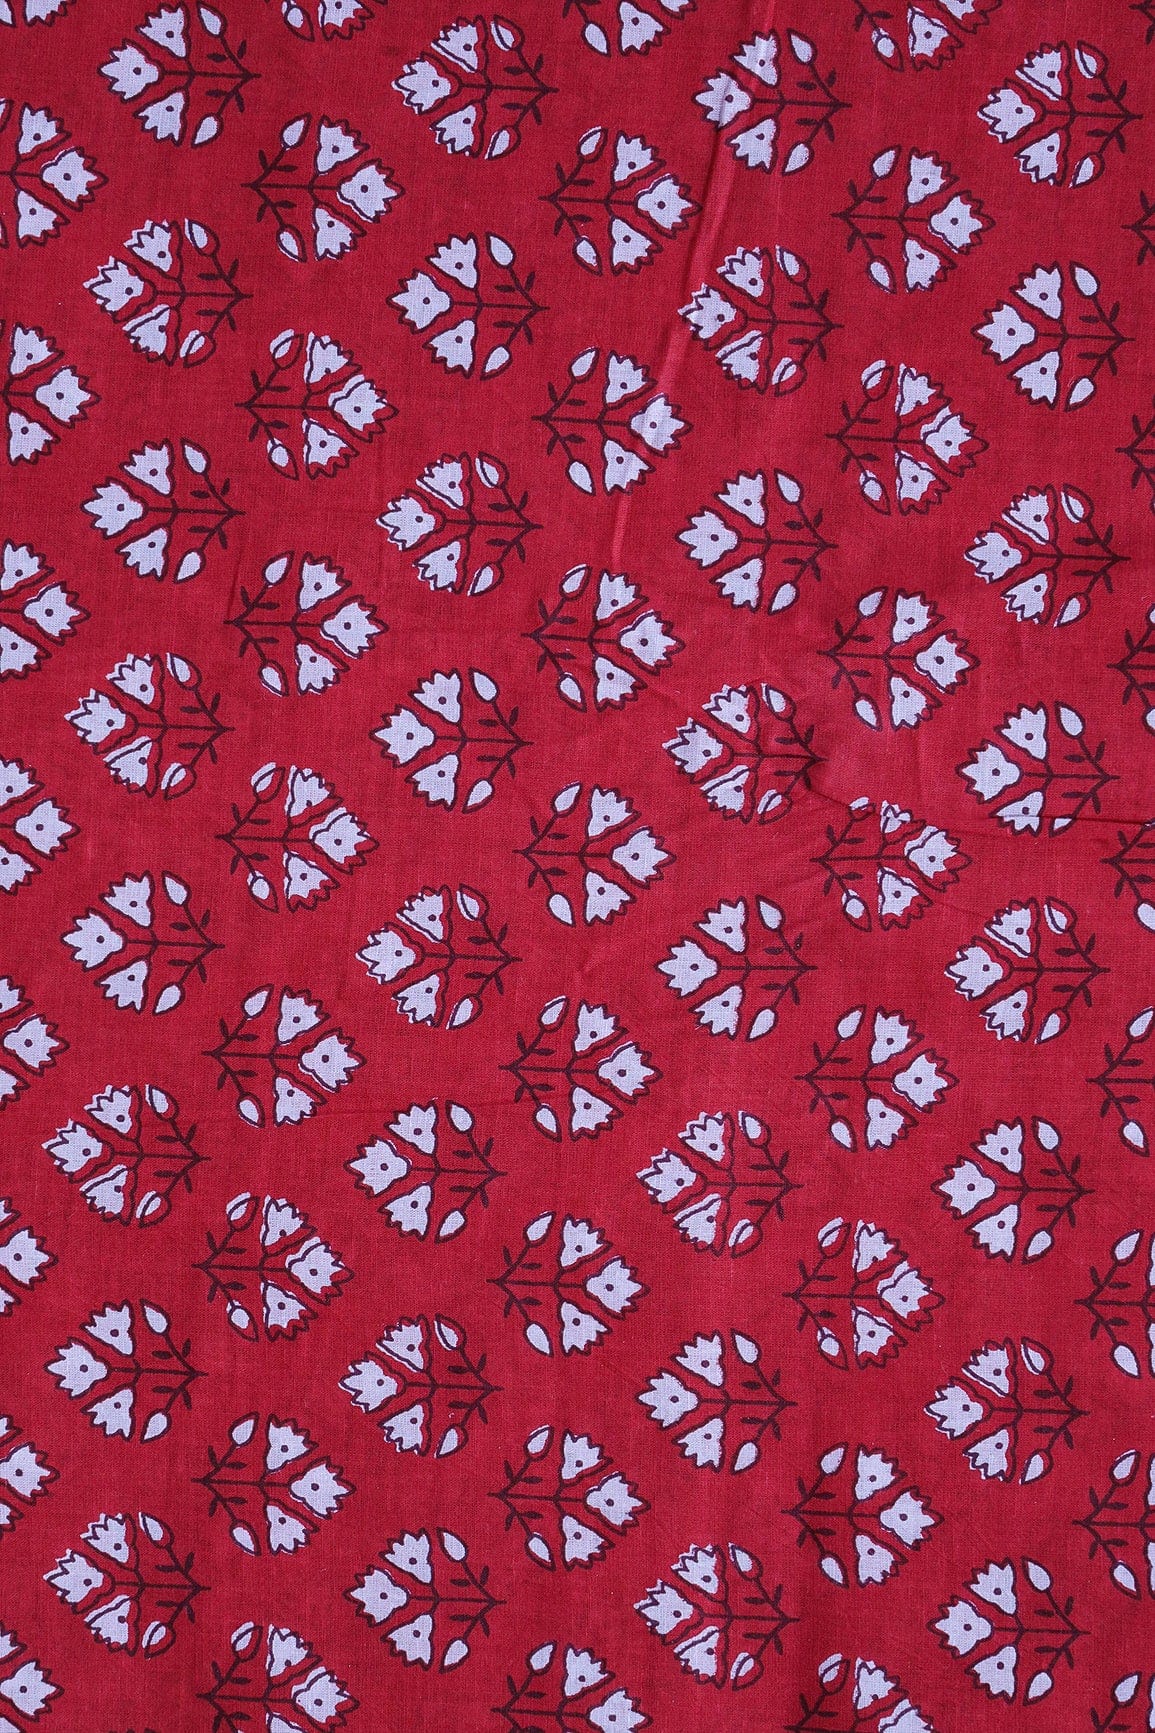 doeraa Prints White Floral Booti Pattern Print On Red Pure Cotton Fabric